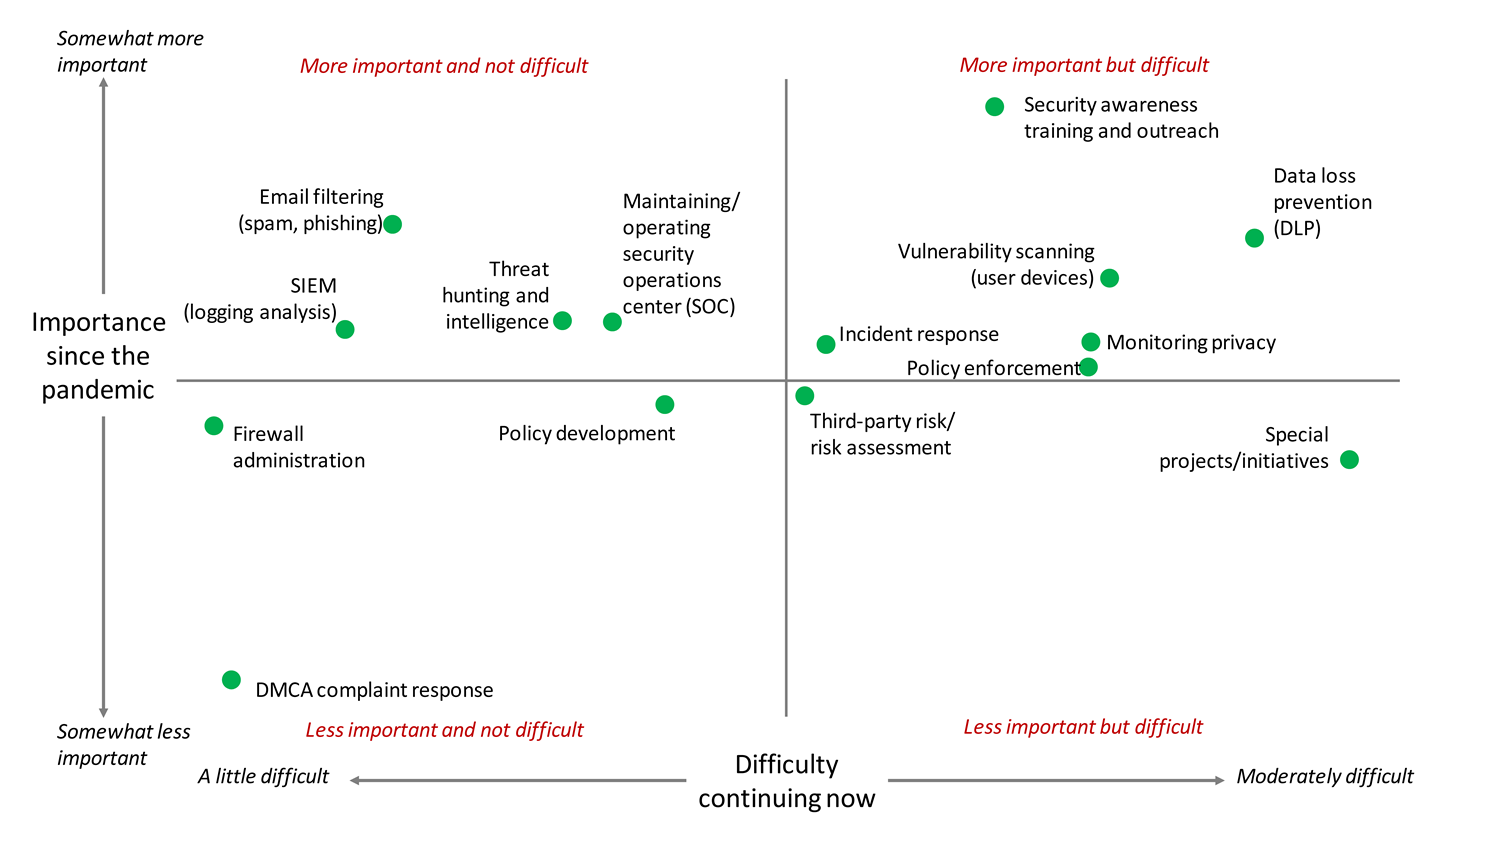 Graph comparing the importance and difficulty of information security tasks now